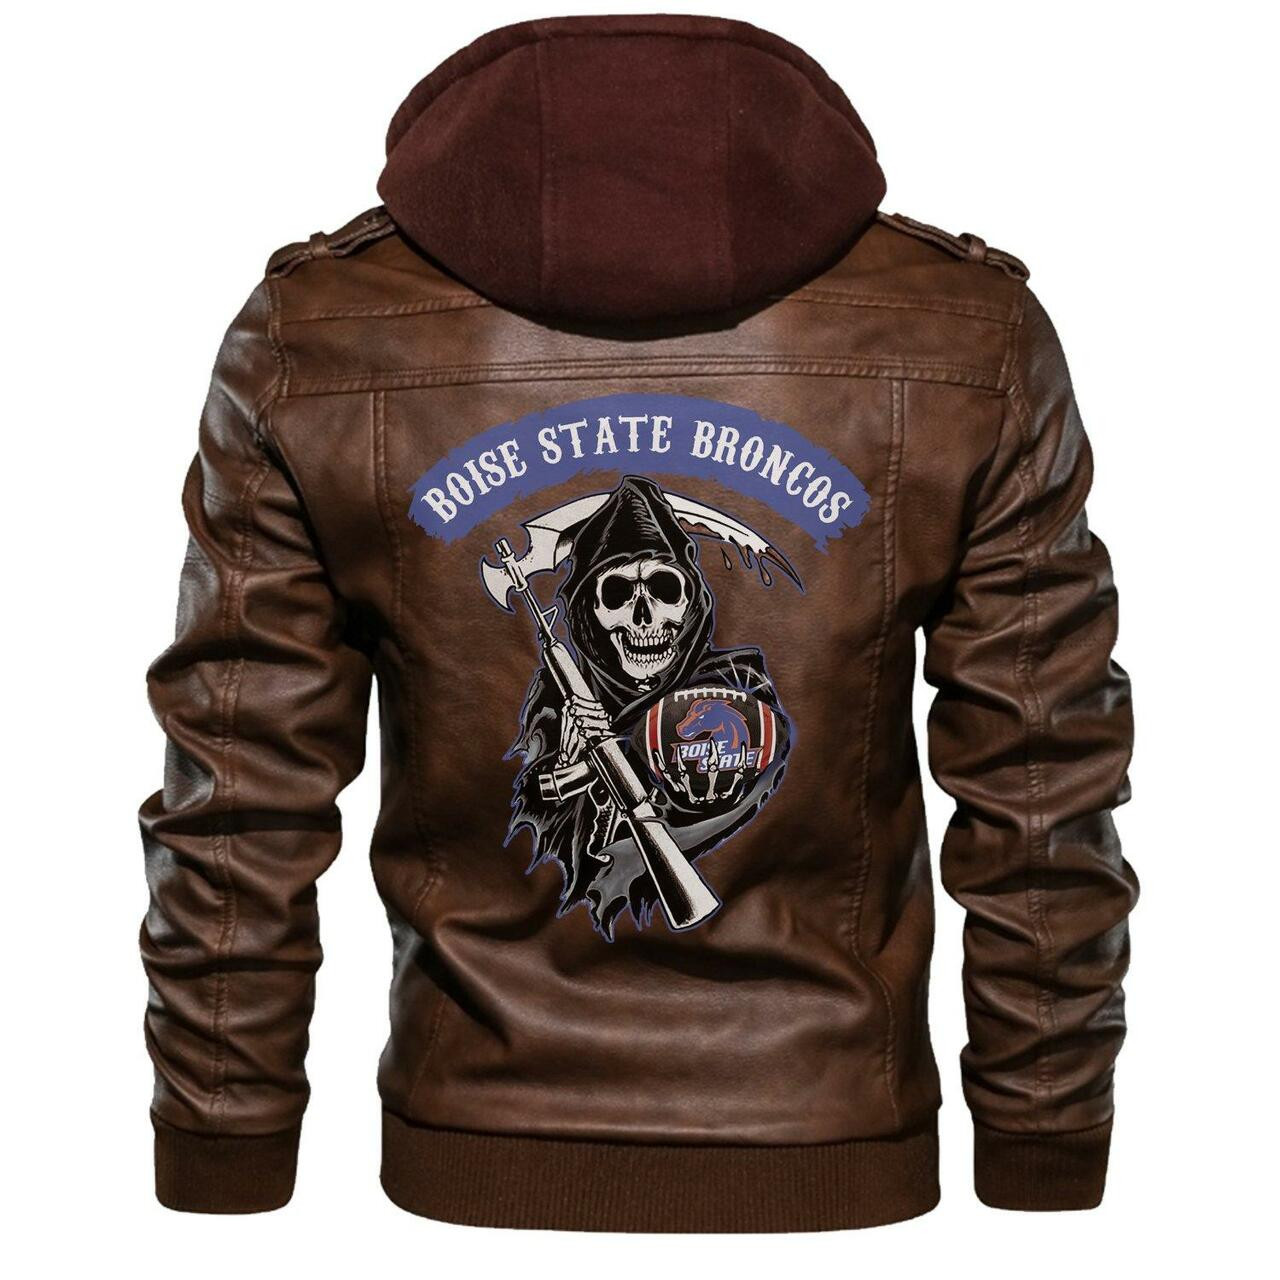 Our store has all of the latest leather jacket 69